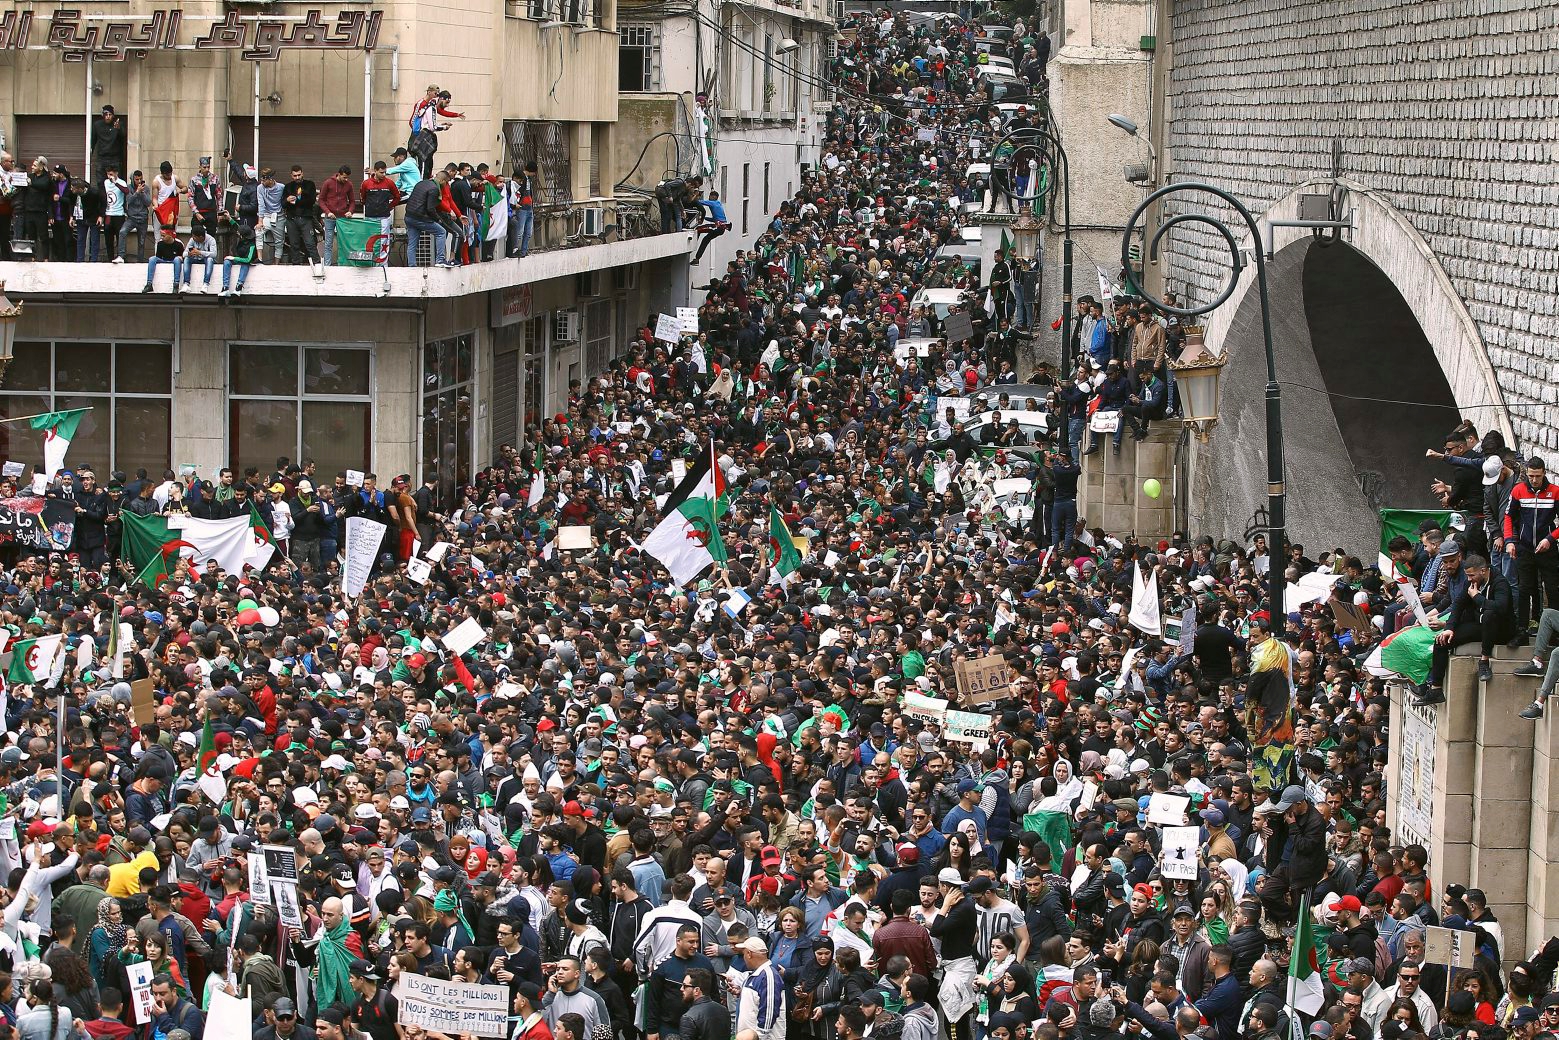 Algerians gather for a demonstration in Algiers, Friday, March 8, 2019. A festive crowd of thousands of protesters marched through central Algiers to protest President Abdelaziz Bouteflika's hold on power. The protesters are challenging Bouteflika's fitness to run for a fifth term in next month's election. (AP Photo/Fateh Guidoum) Algeria Protests